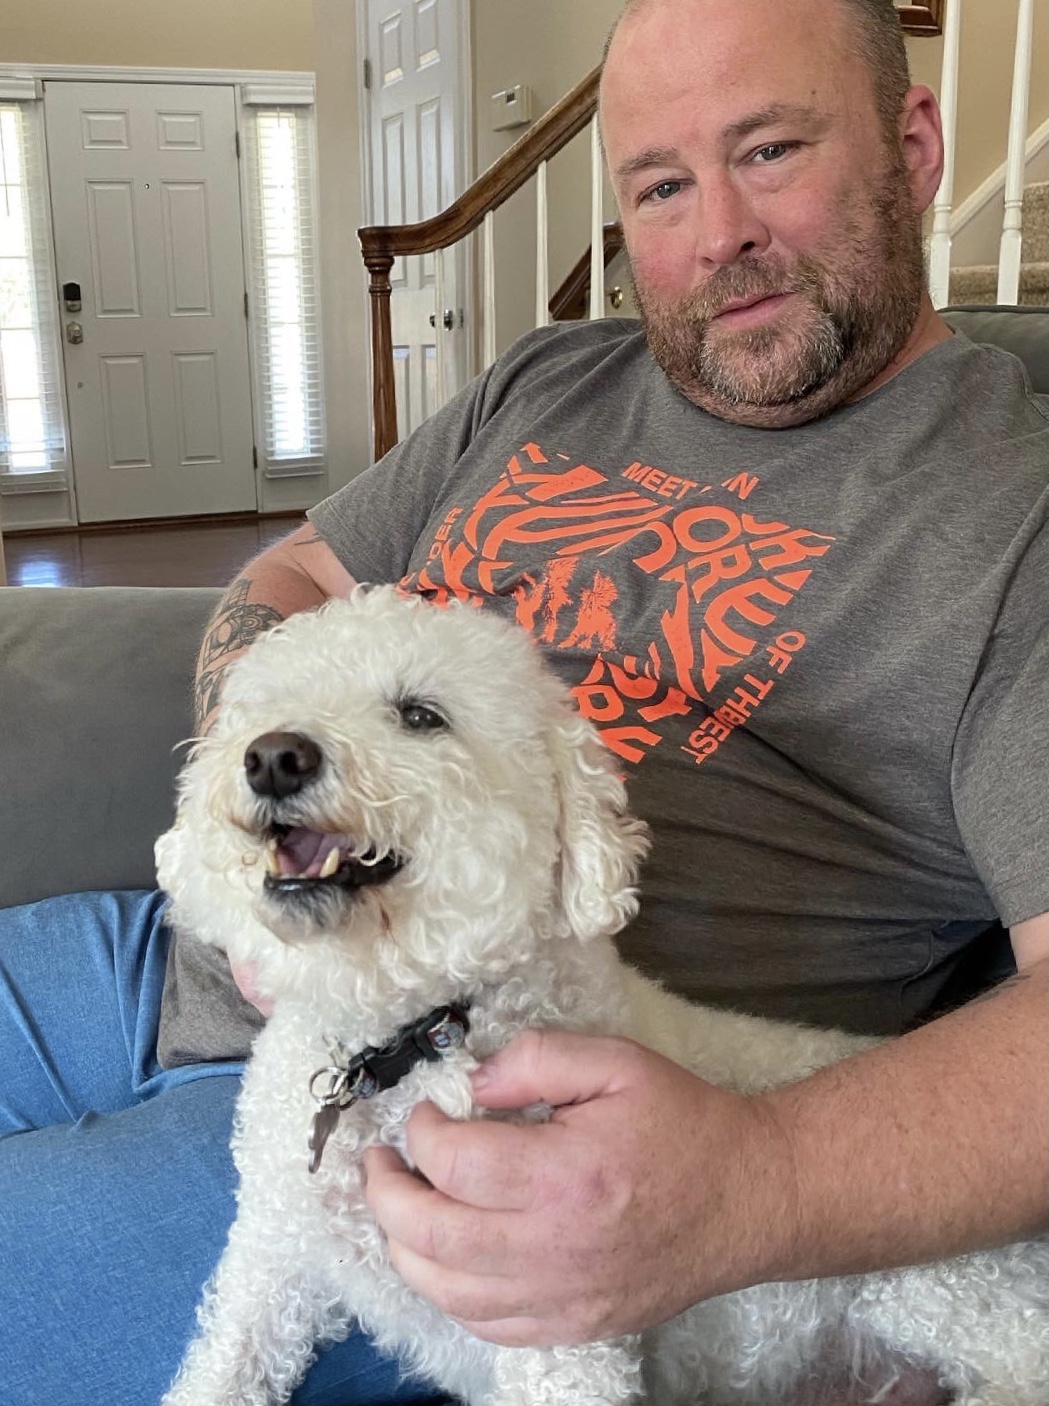 Michael Donovan Veterinary and Rehabilitation Center of Cape Elizabeth and Henry the Bichon Frise